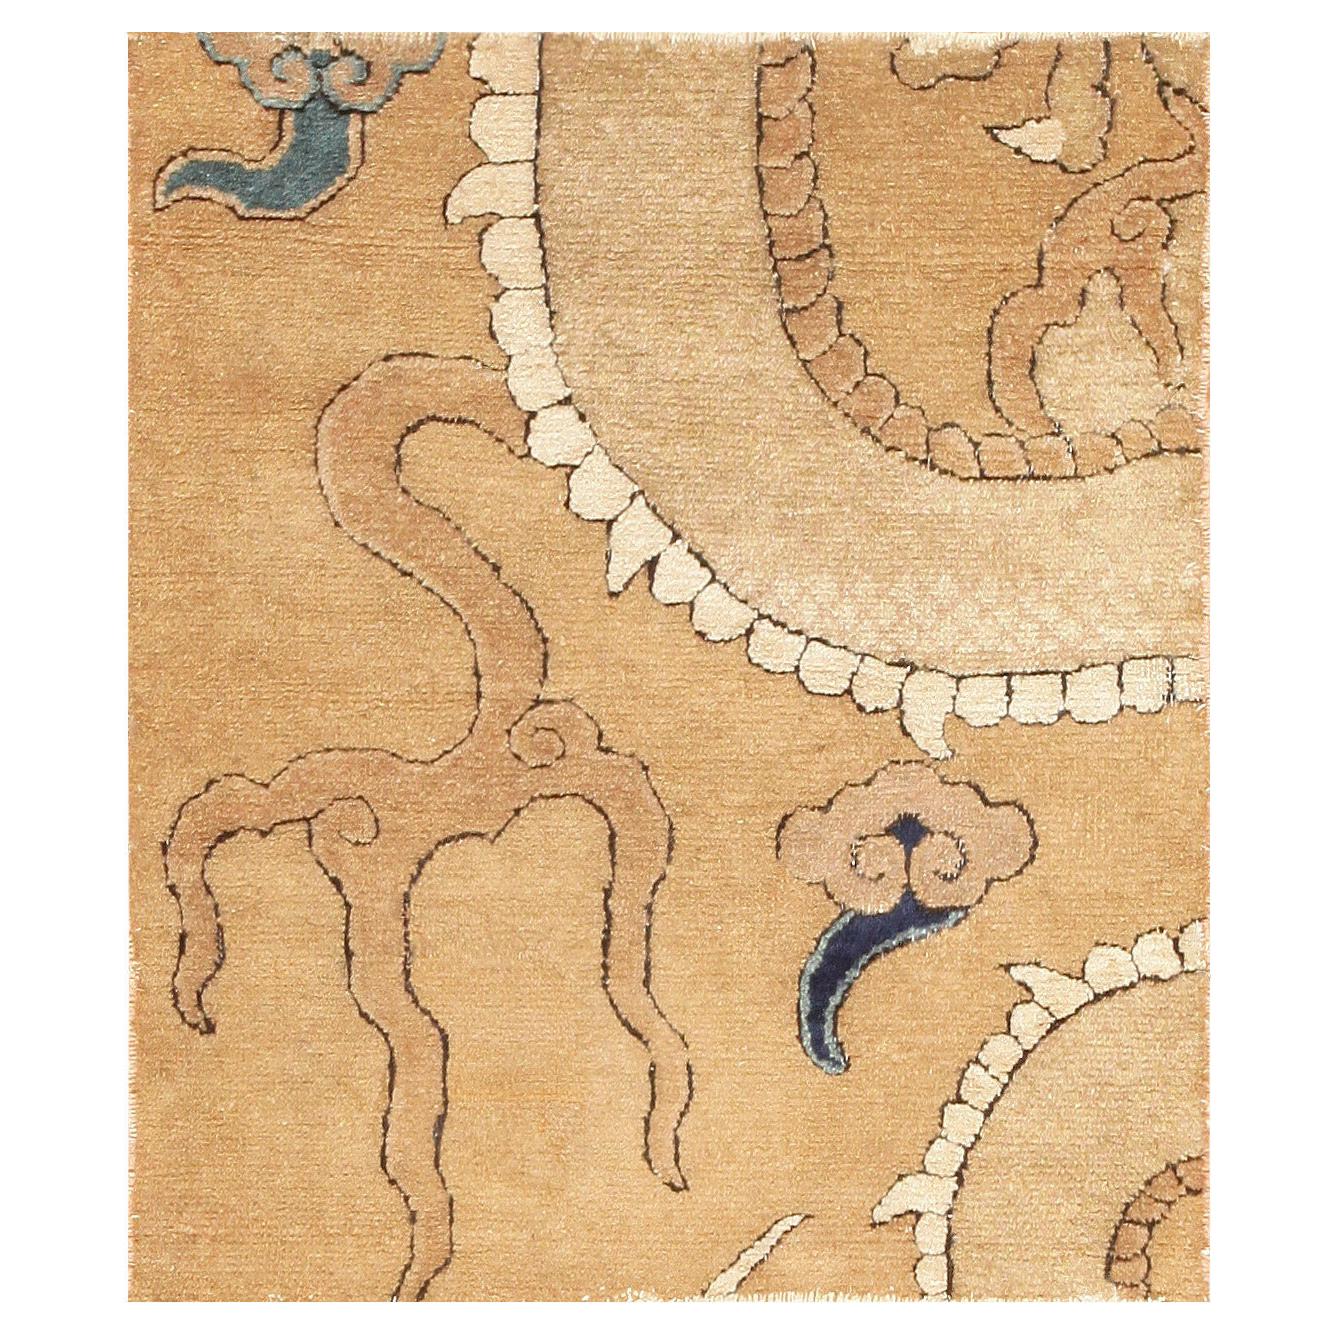 16th Century Ming Dynasty Dragon Chinese Carpet Fragment. 3 ft x 3 ft